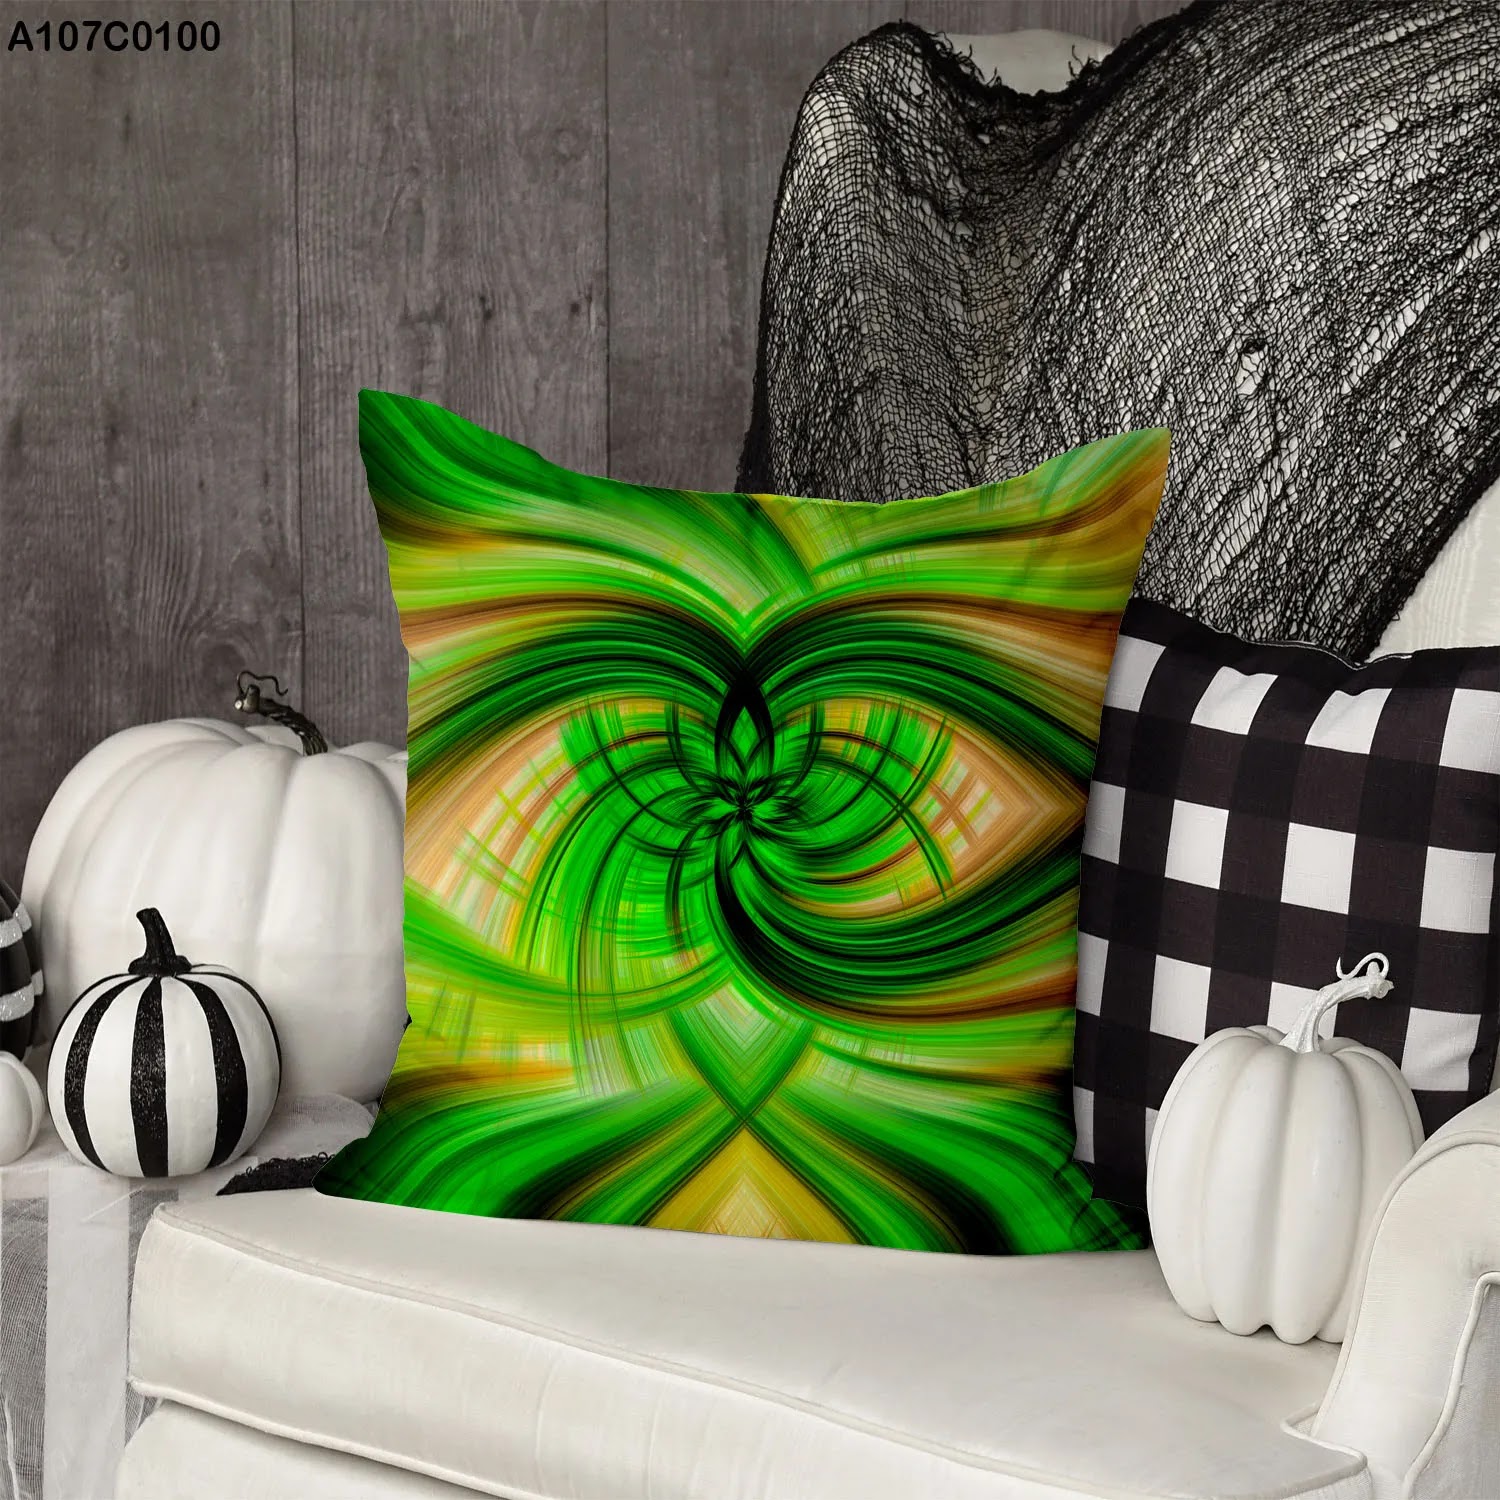 Green gradation pillow case with some yellow